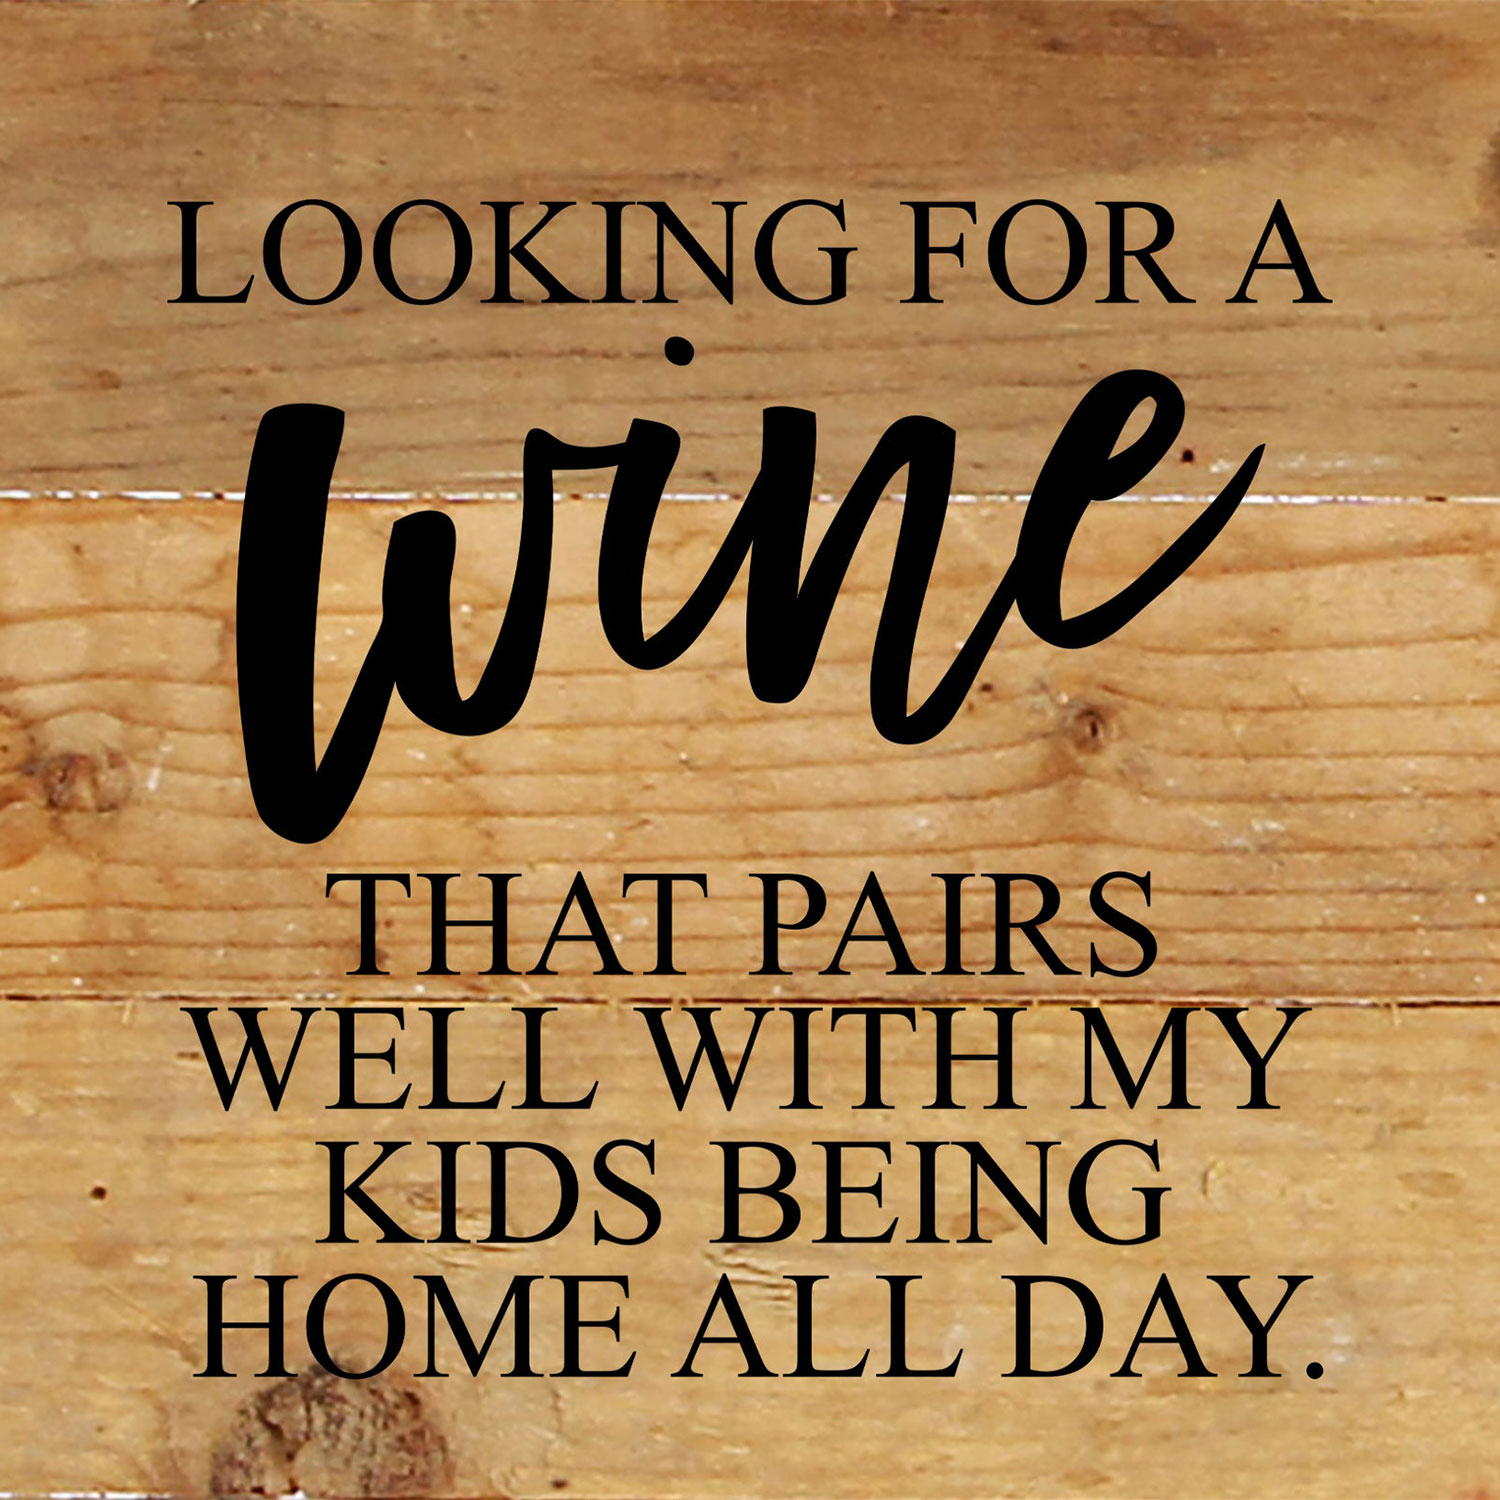 Looking for a wine that pairs well with my kids being home all day. / 6"x6" Reclaimed Wood Sign